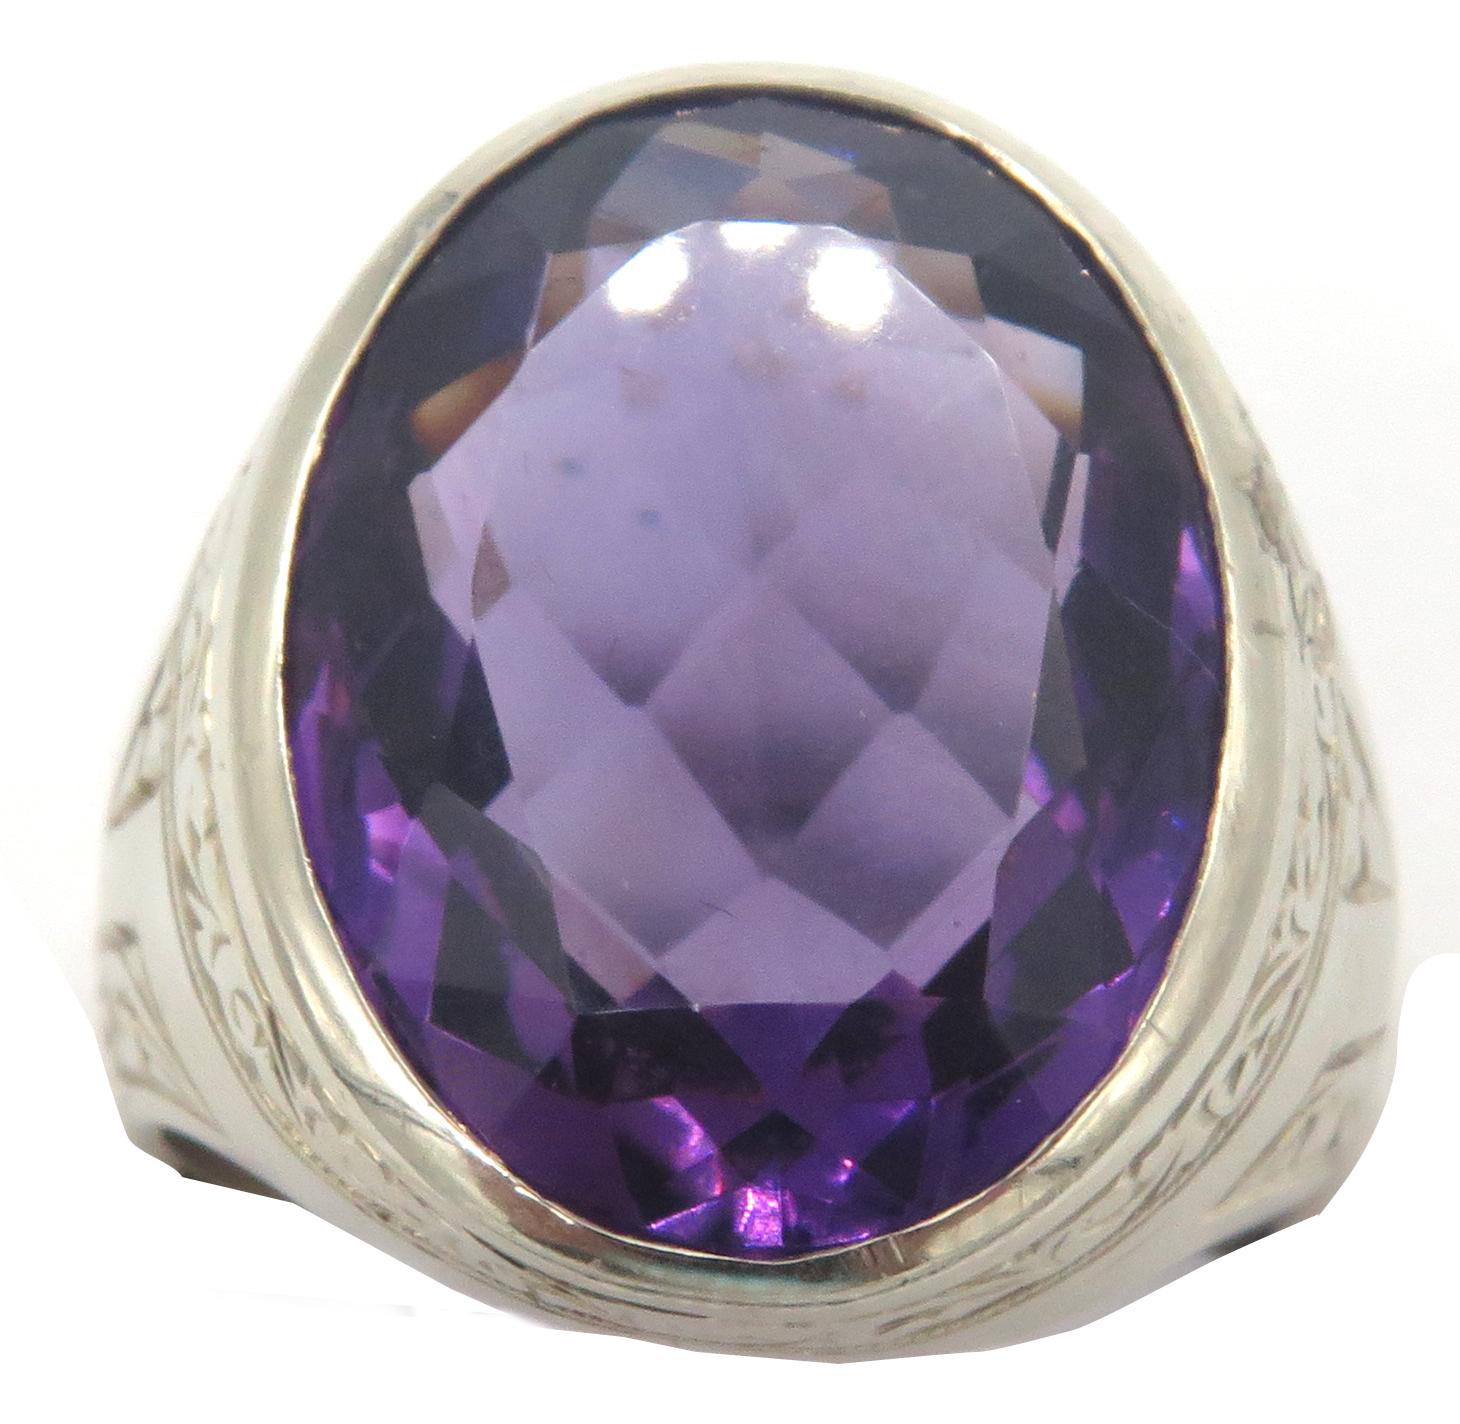 A beautifully faceted oval amethyst gemstone set in a 14k white gold setting. Engravings appear around the top and sides of the white gold band. The ring measures 1.25 inches high and 0.75 inches wide. Simple yet stunning, this is a versatile piece